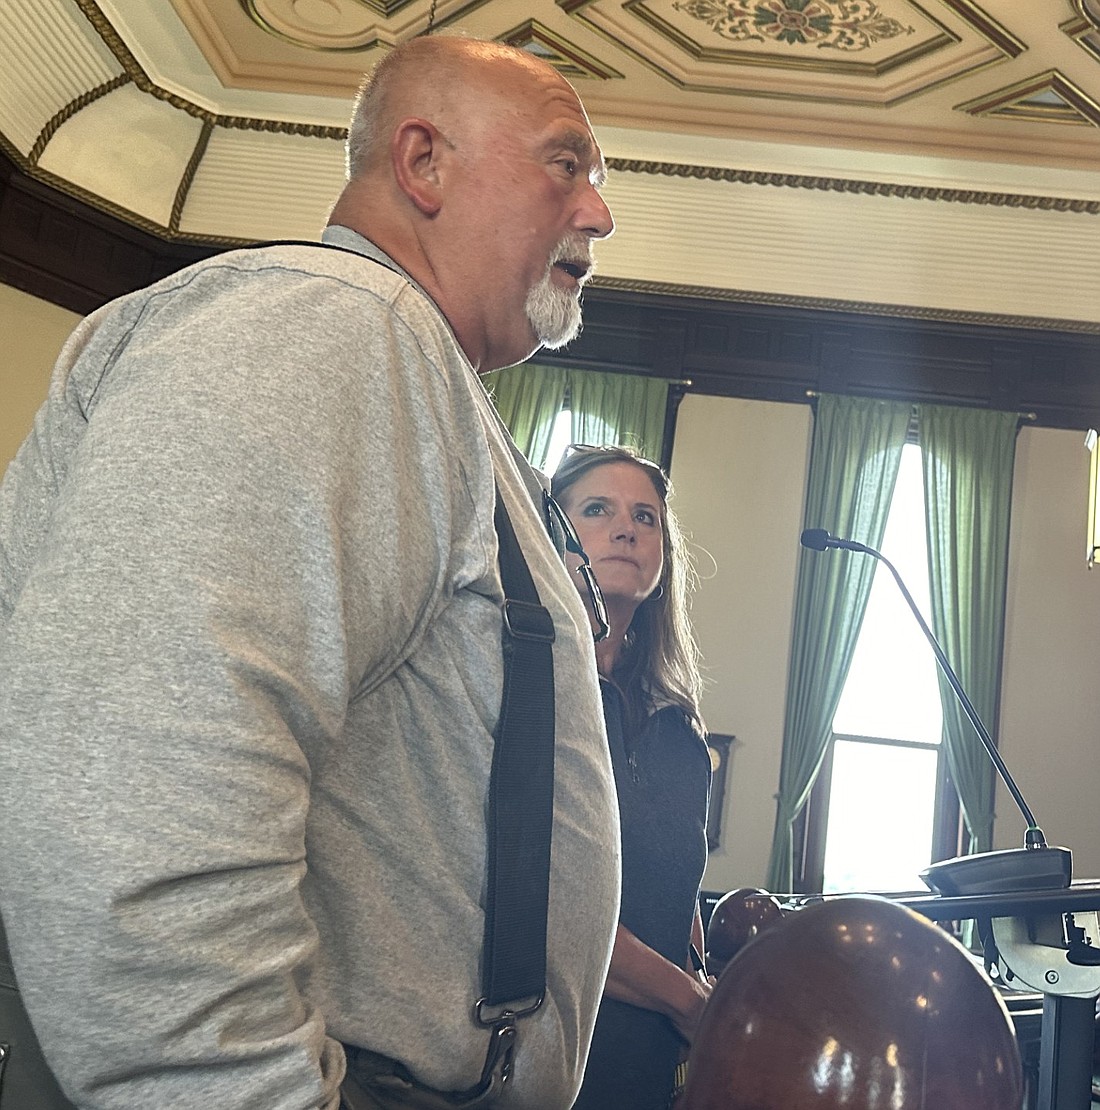 Kosciusko County Council President Mike Long (L) explains the purpose of a salary analysis by Reedy Financial Group to the Kosciusko County Commissioners on Tuesday while Vice President Kathy Groninger (R) listens. Photo by David Slone, Times-Union